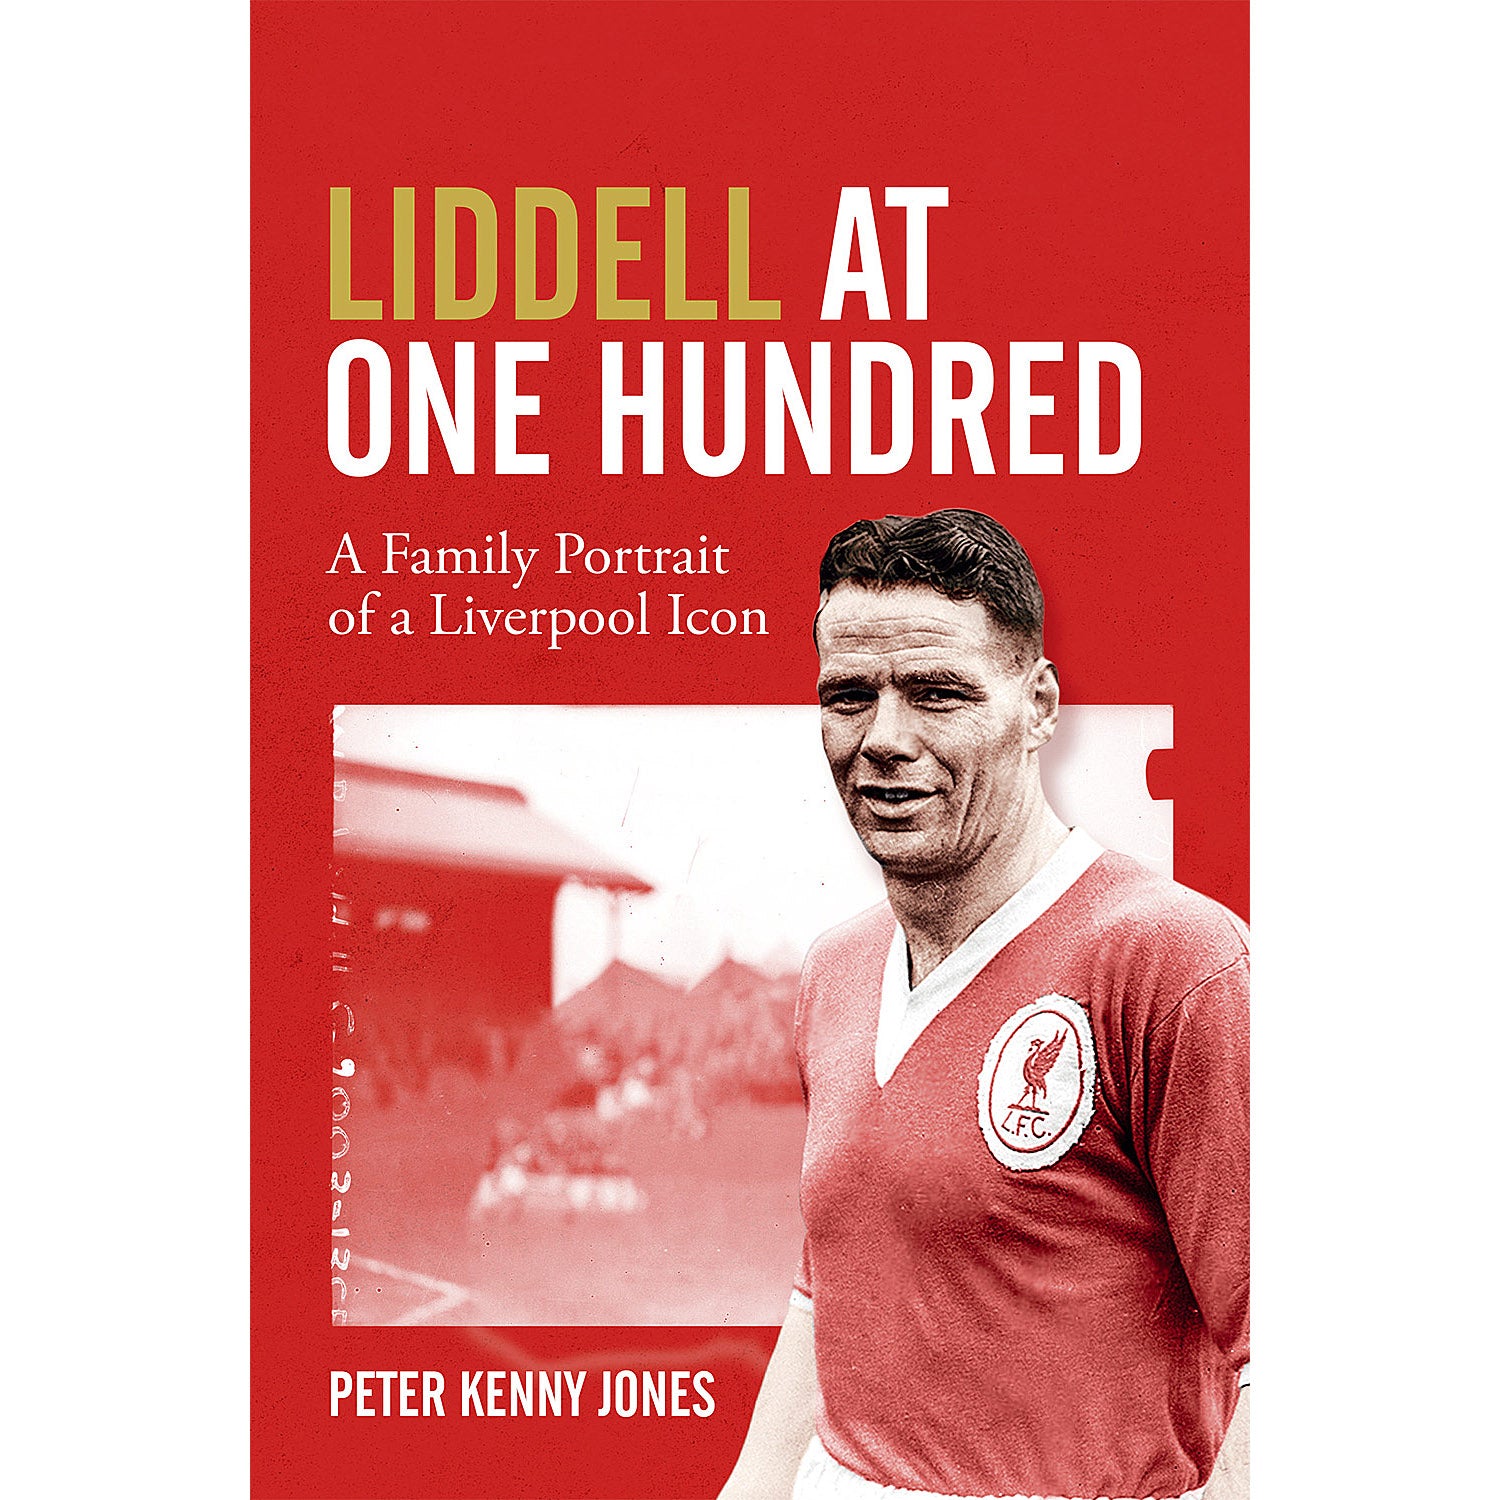 Liddell at One Hundred – A Family Portrait of a Liverpool Icon